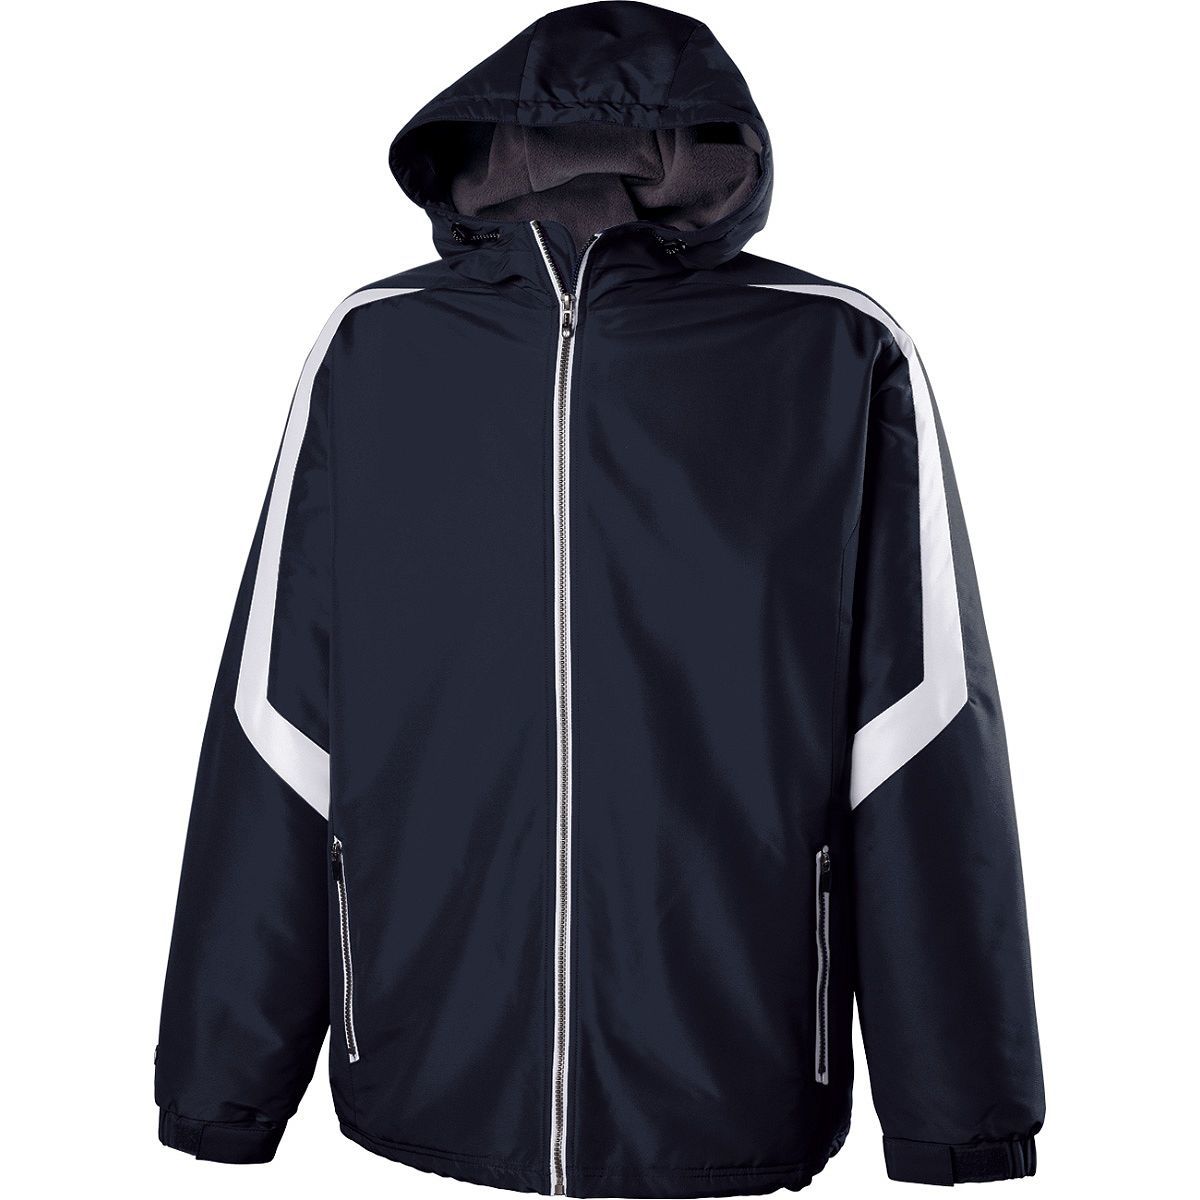 Charger Jacket - 229059